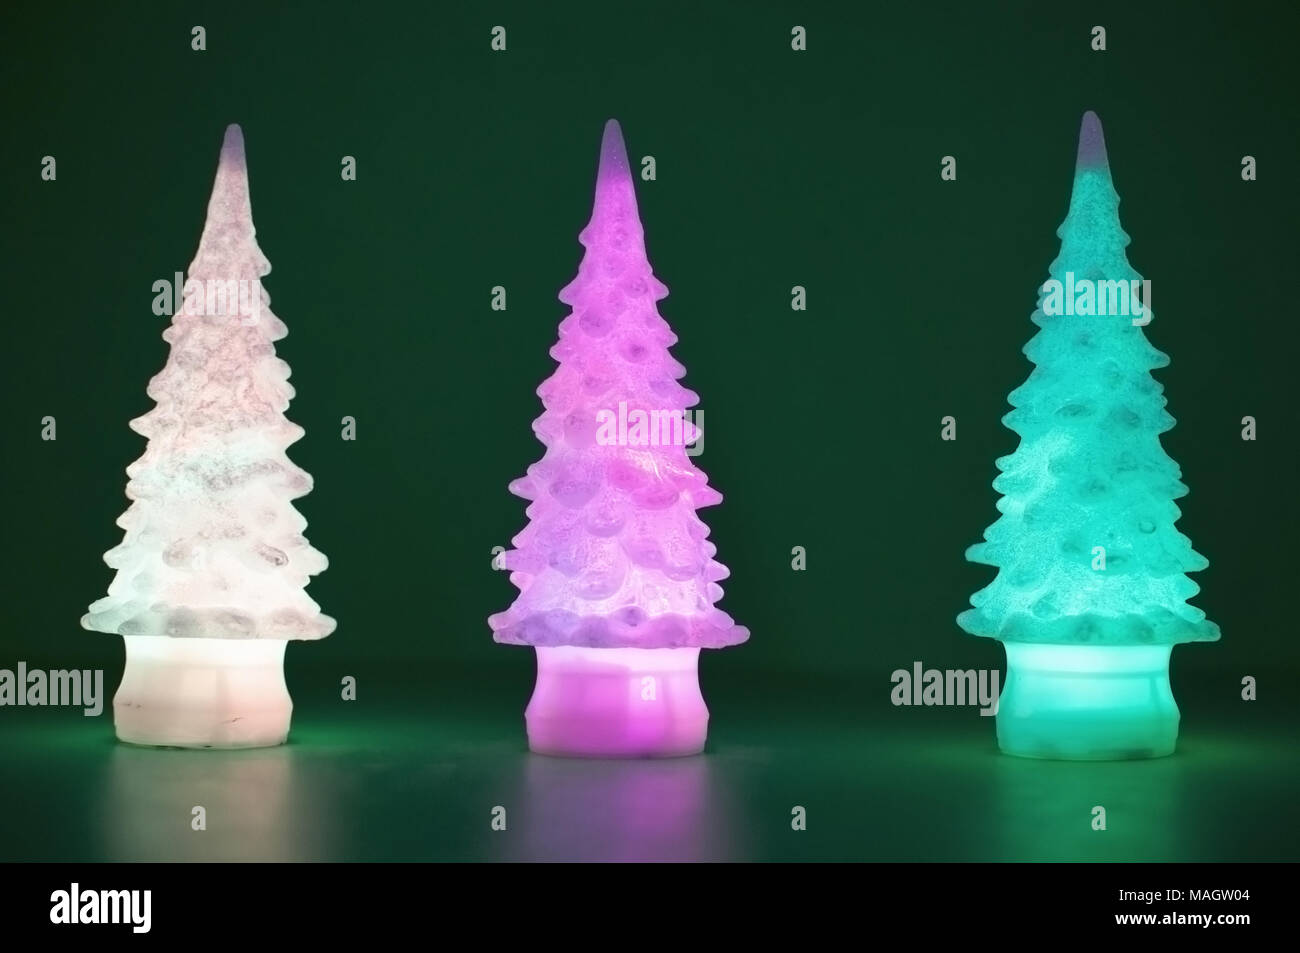 Light up pine trees glittering different colors for Christmas. Stock Photo